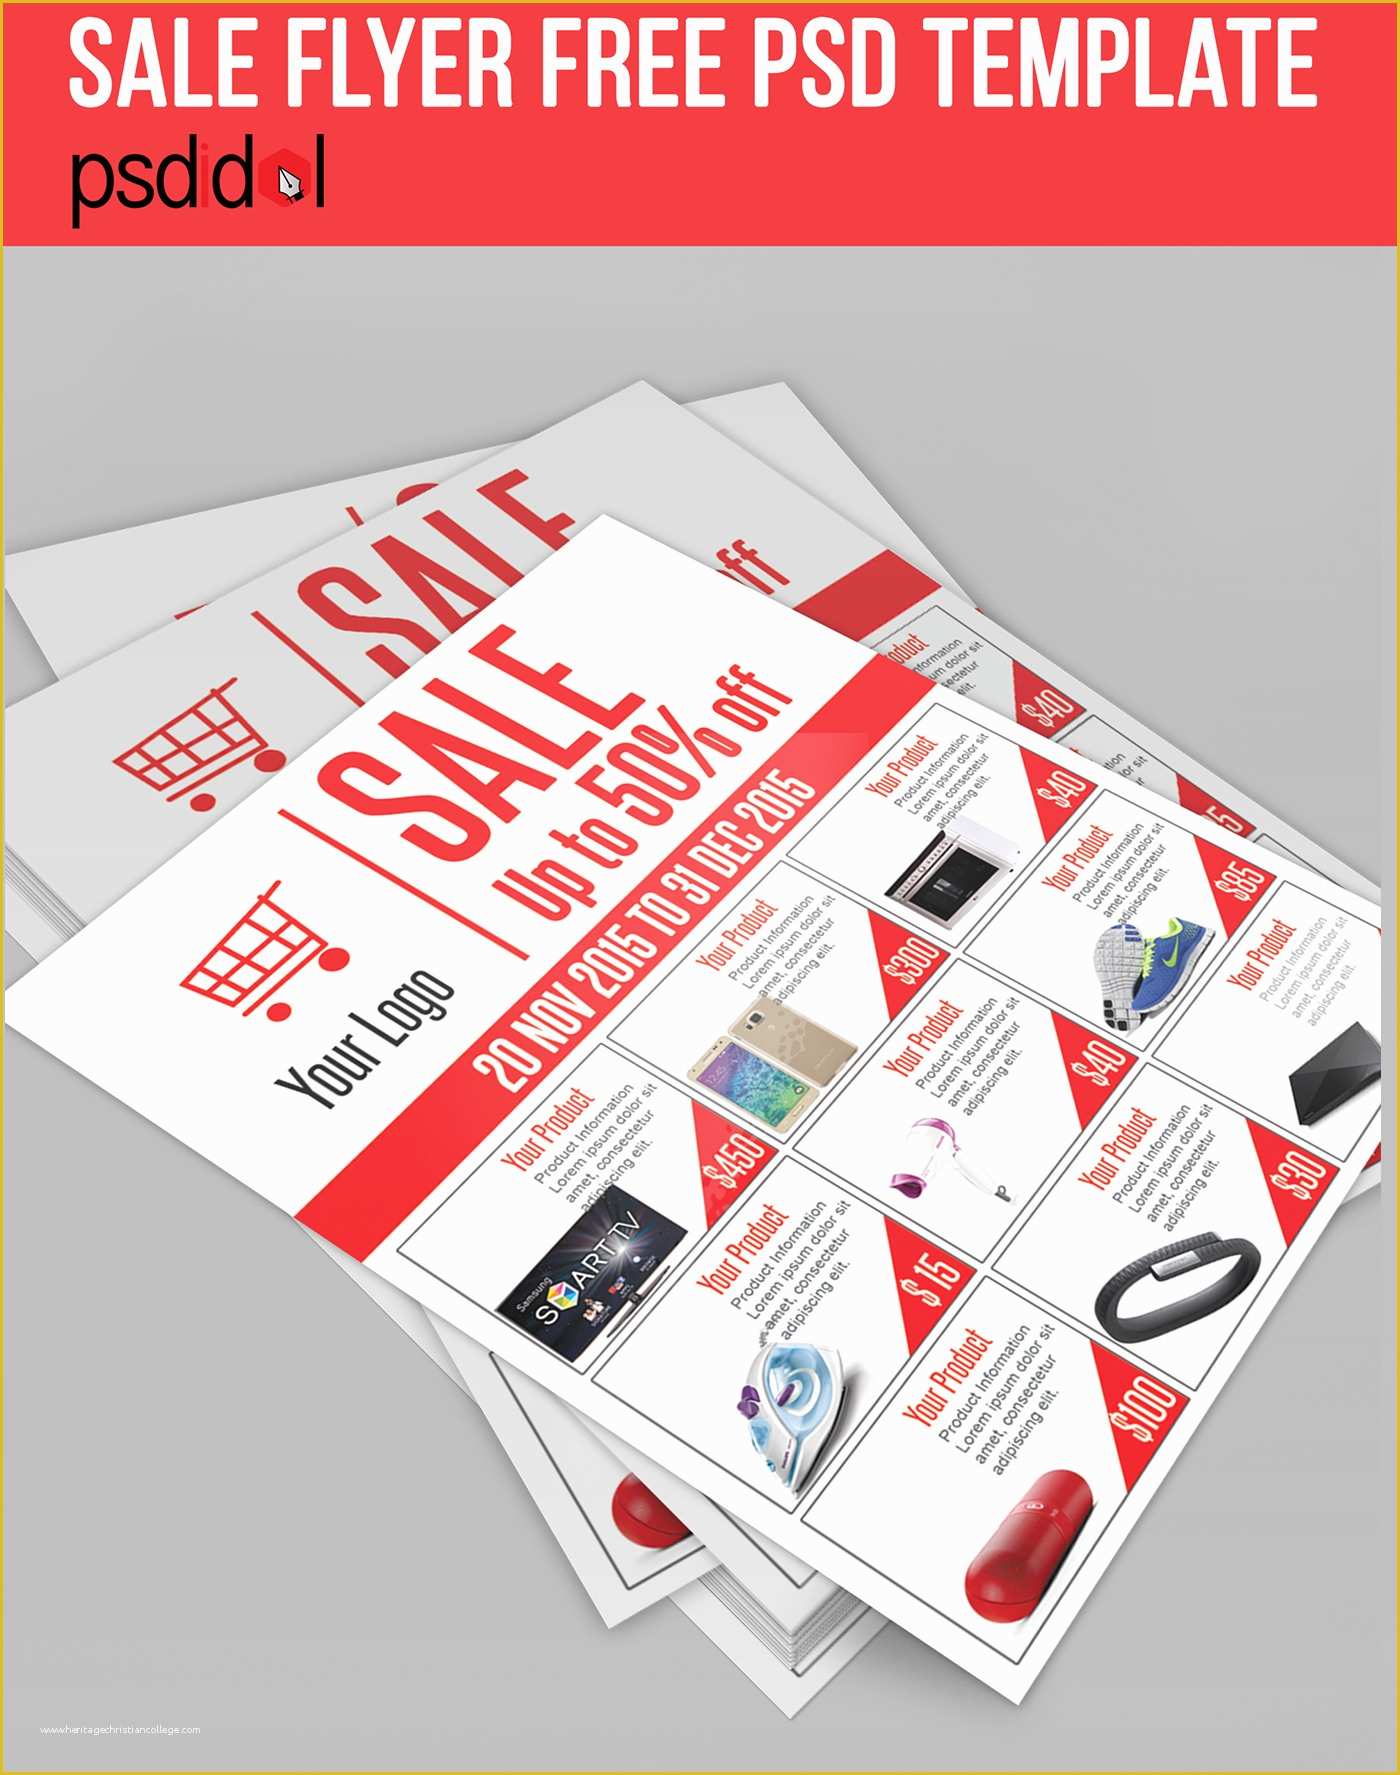 Free Flyer Design Templates Of Sale Flyer Free Psd Template Download On Behance